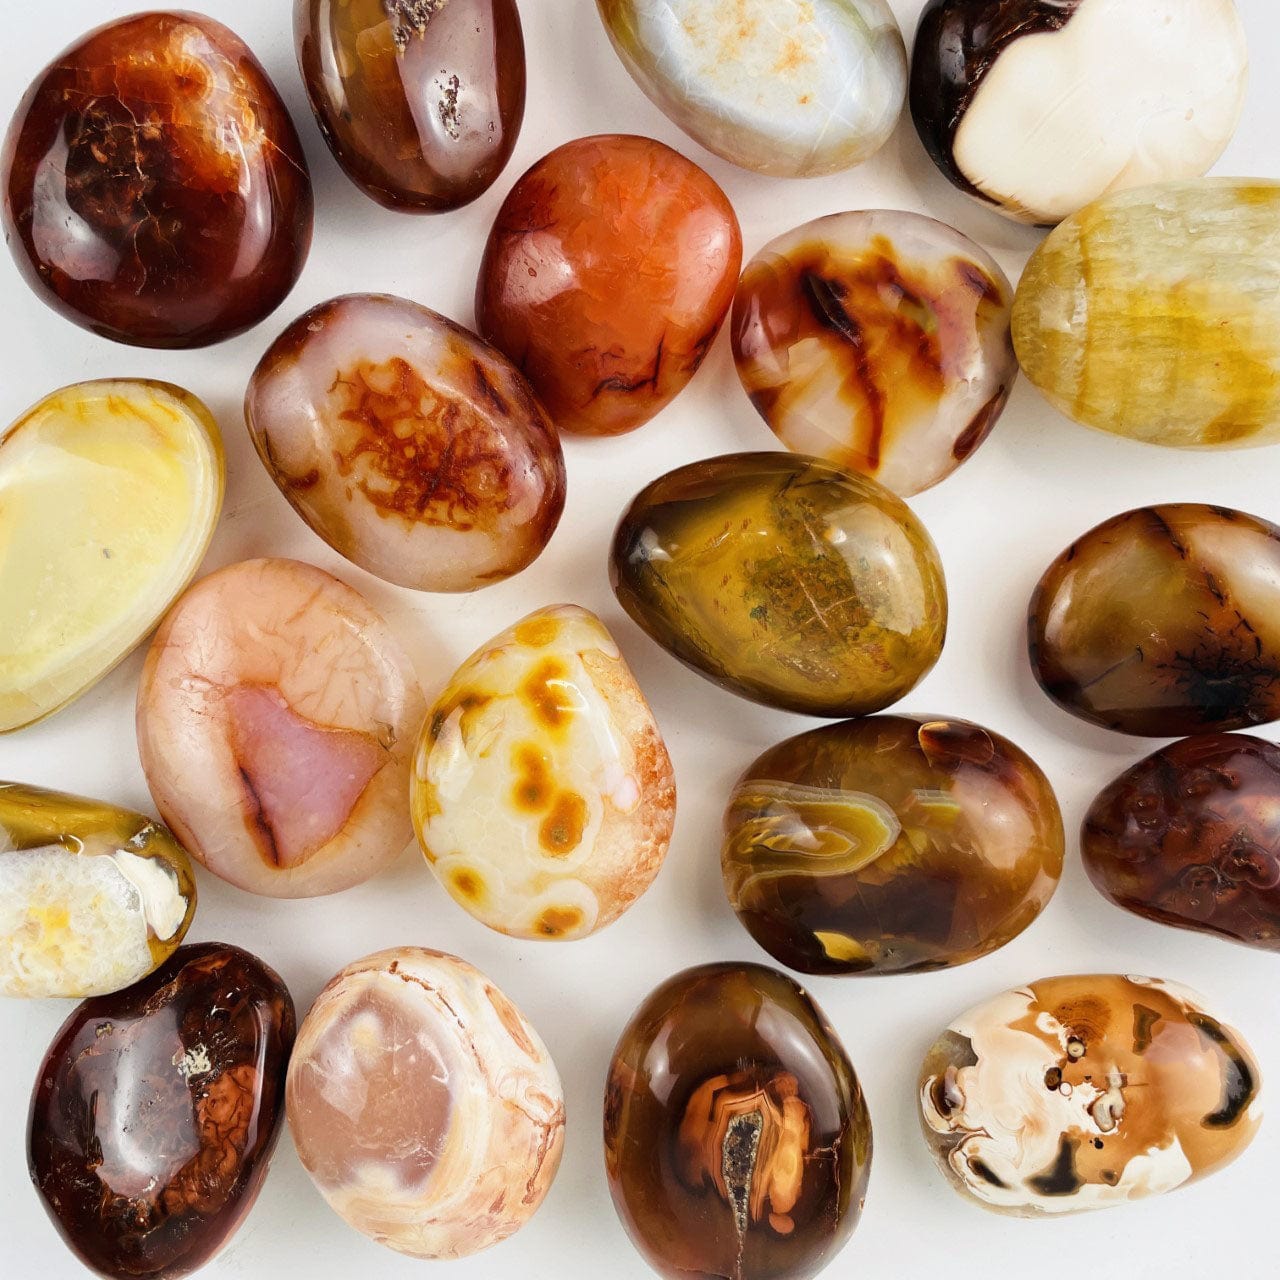 Carnelian Agate Tumbled Stones showing color and shape variation